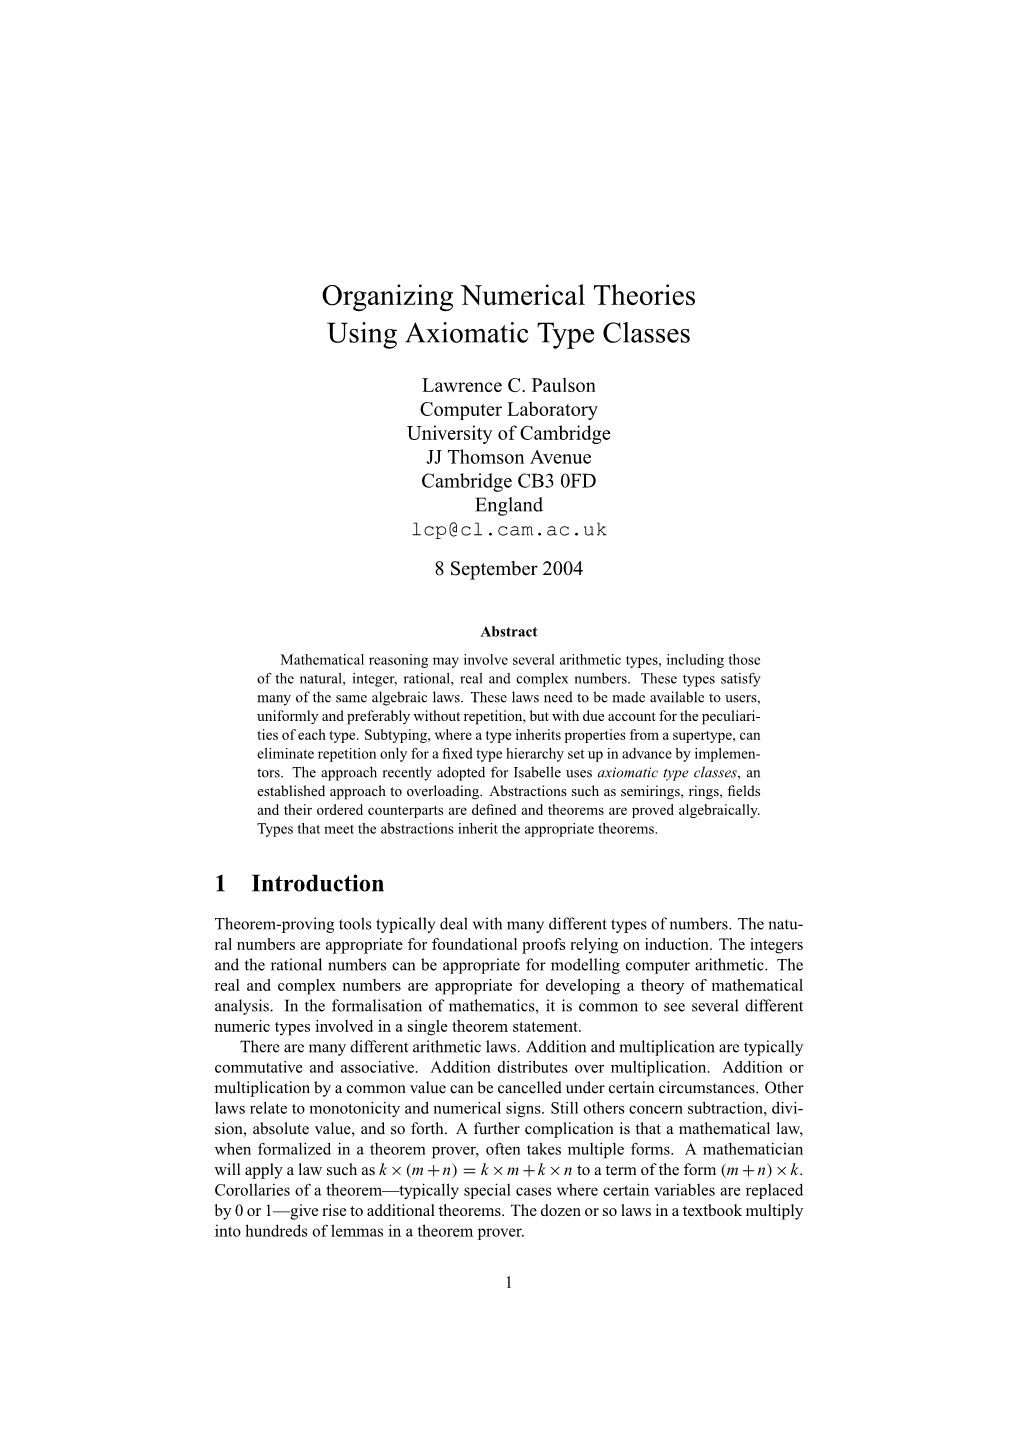 Organizing Numerical Theories Using Axiomatic Type Classes